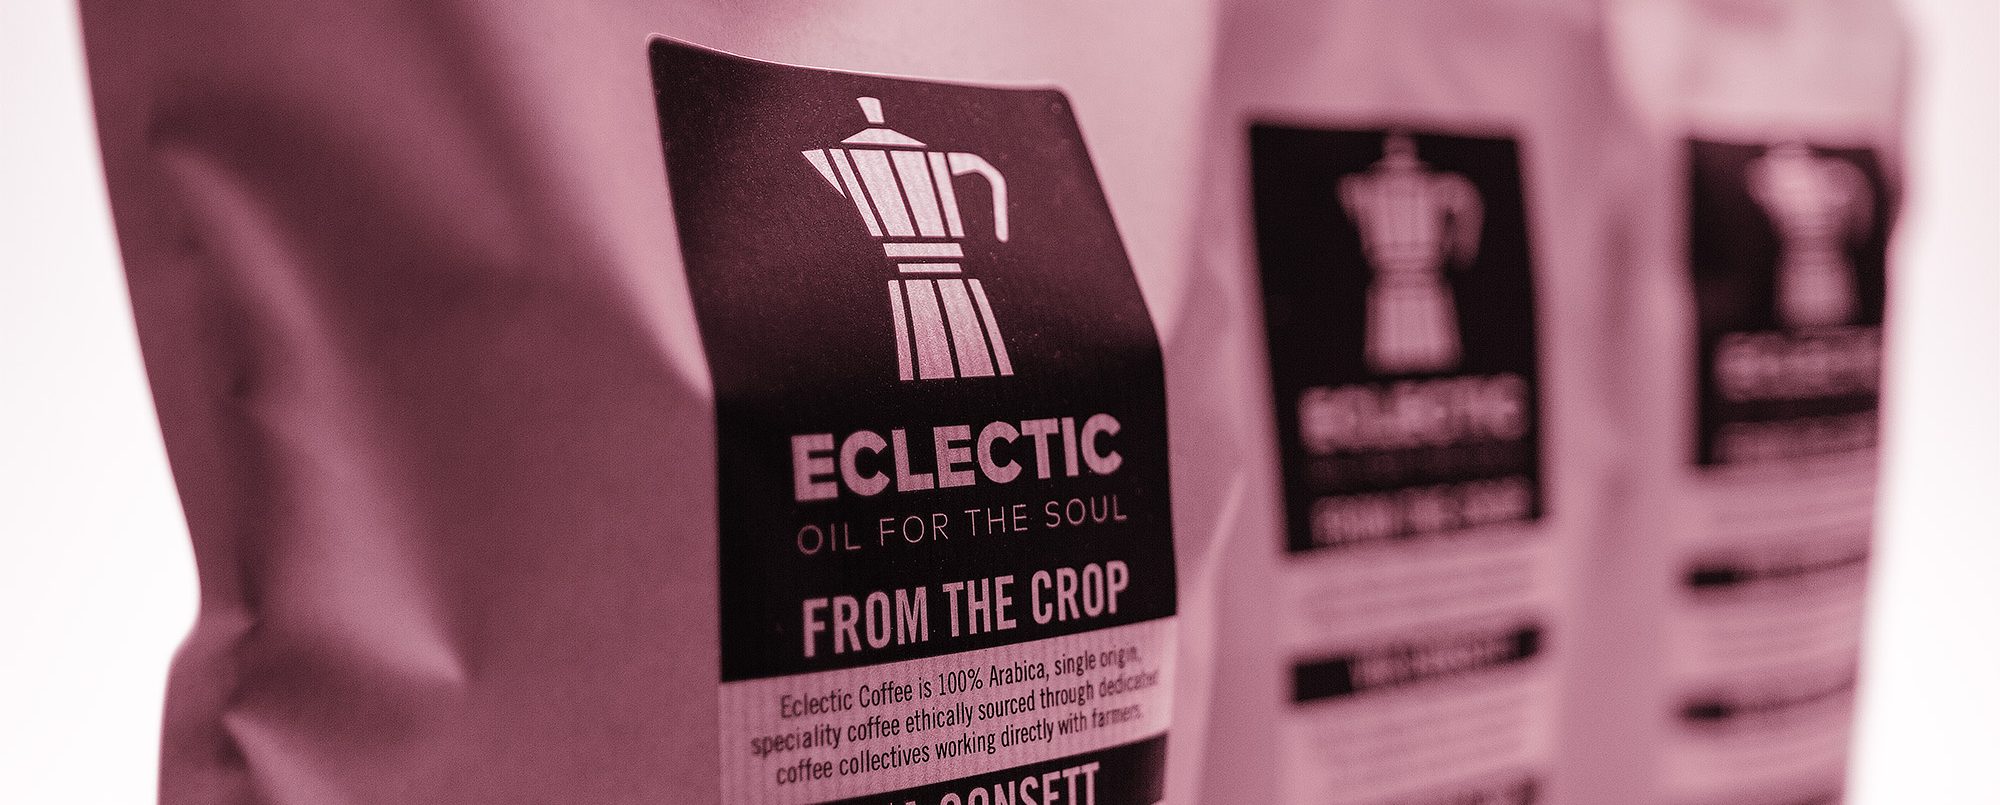 Eclectic Coffee Roasters Consett Country Durham nano roastery coffee beans